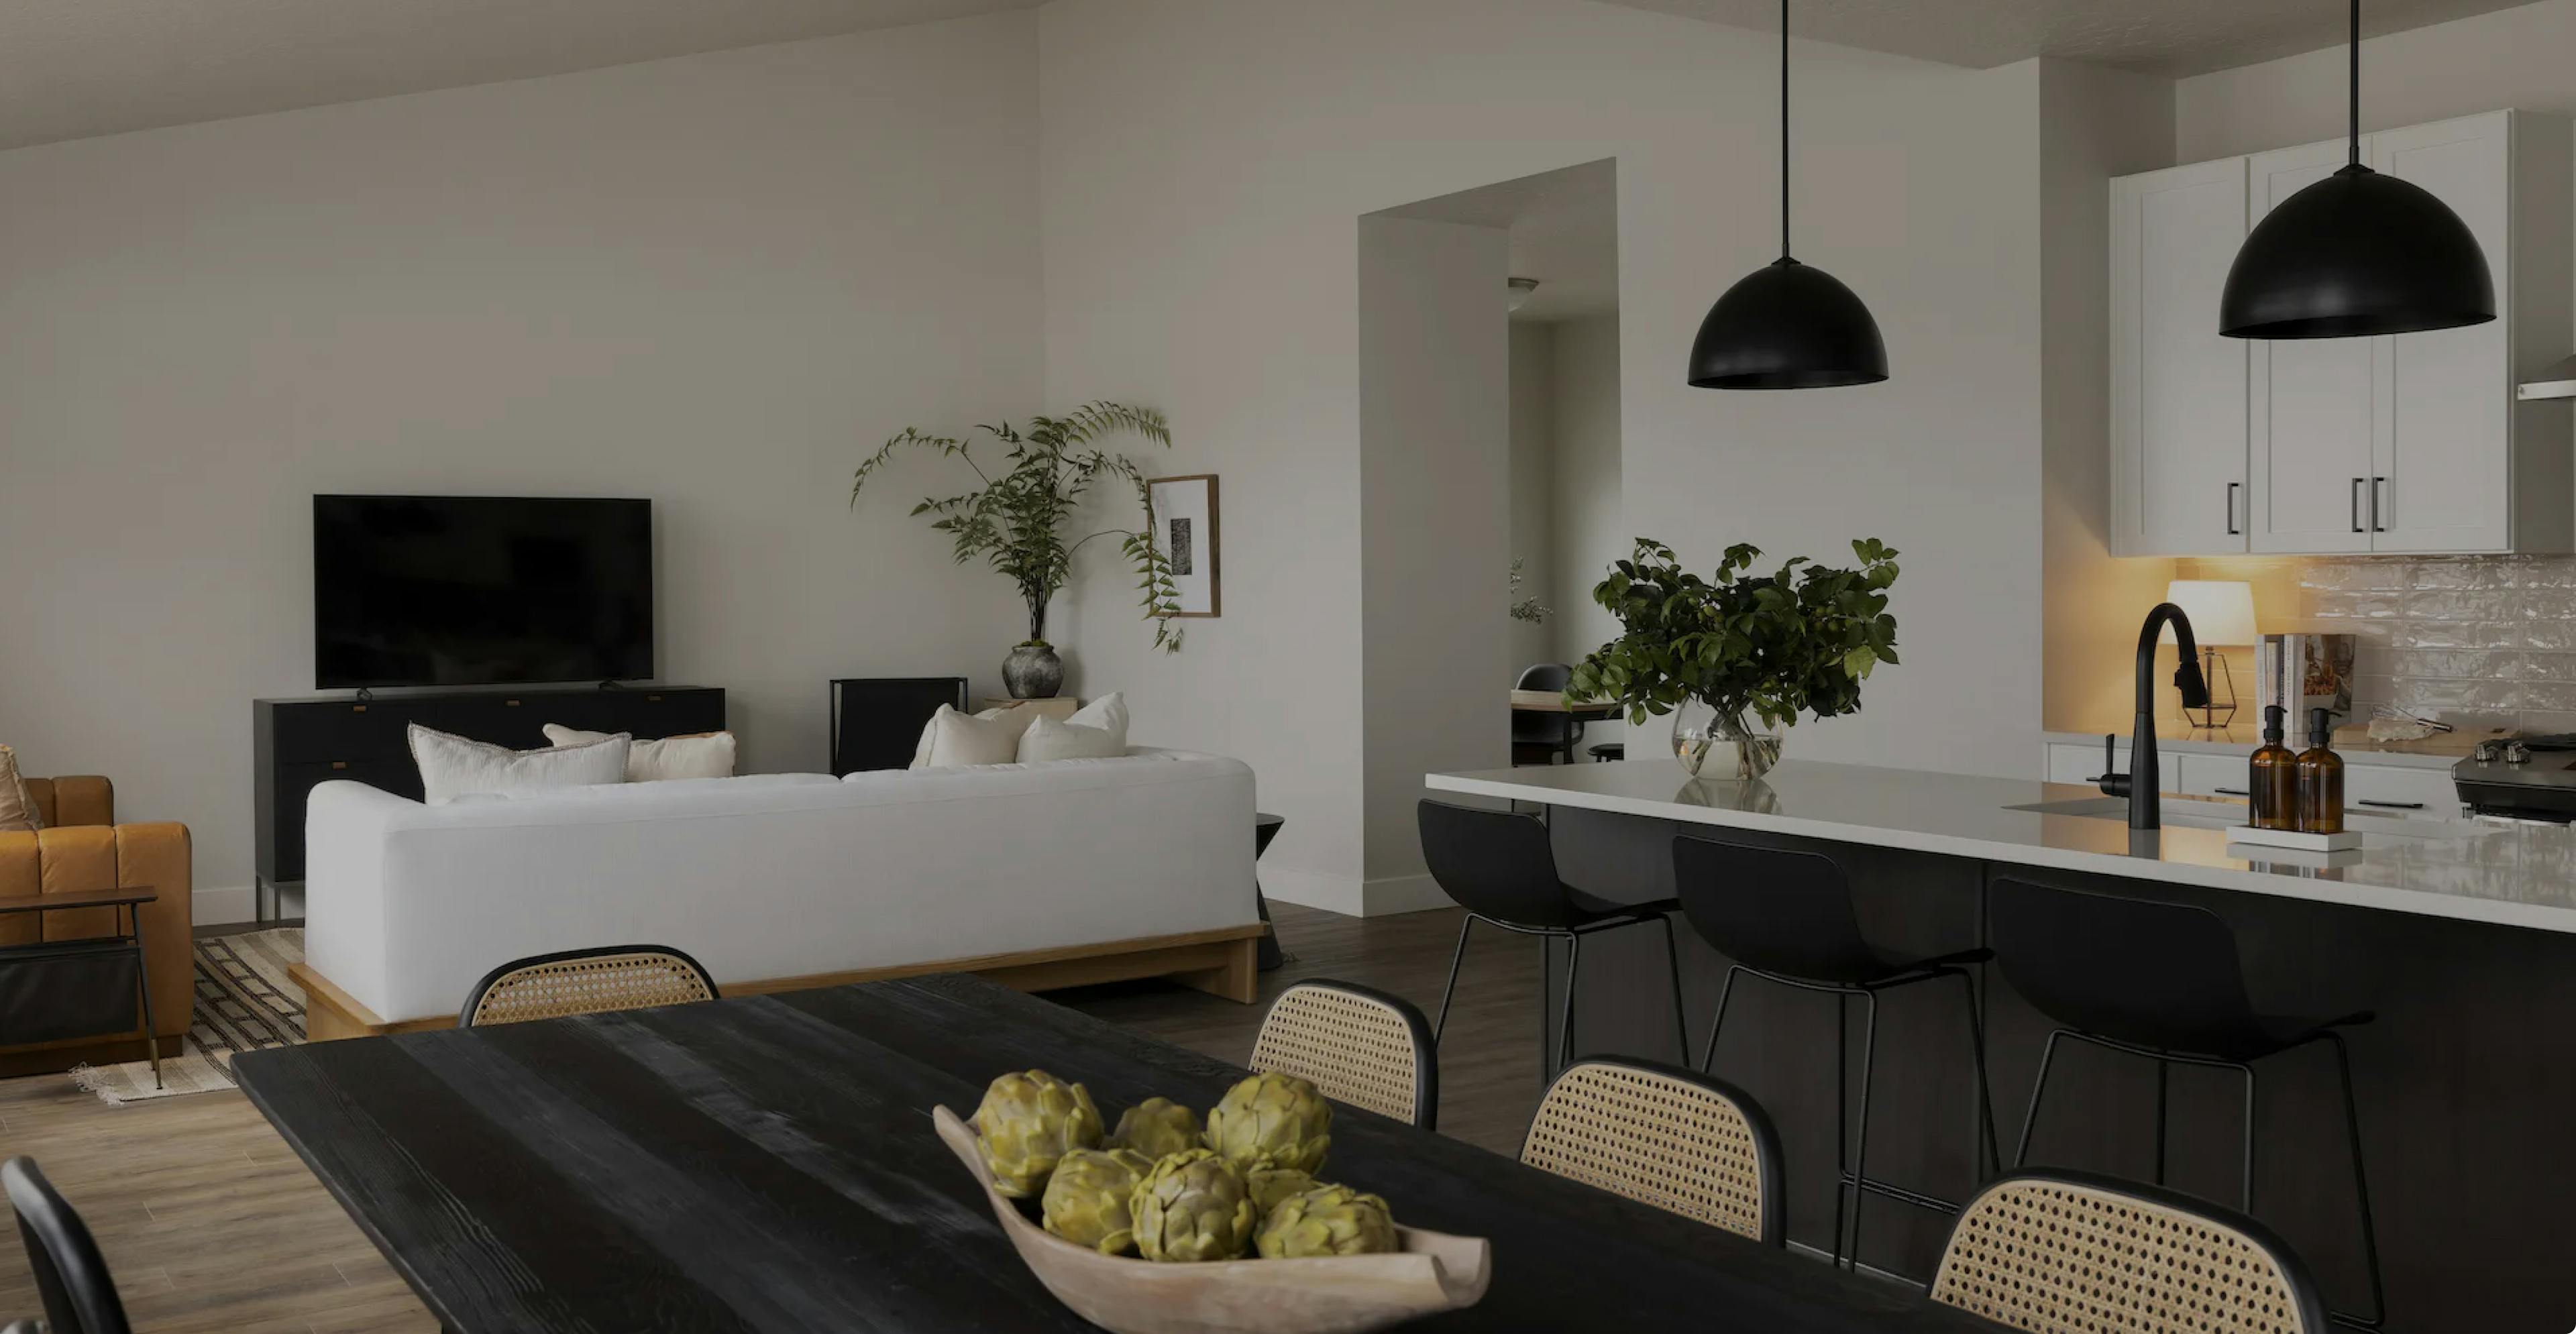 Image of an apartment with an open concept kitchen, dining room and living area.